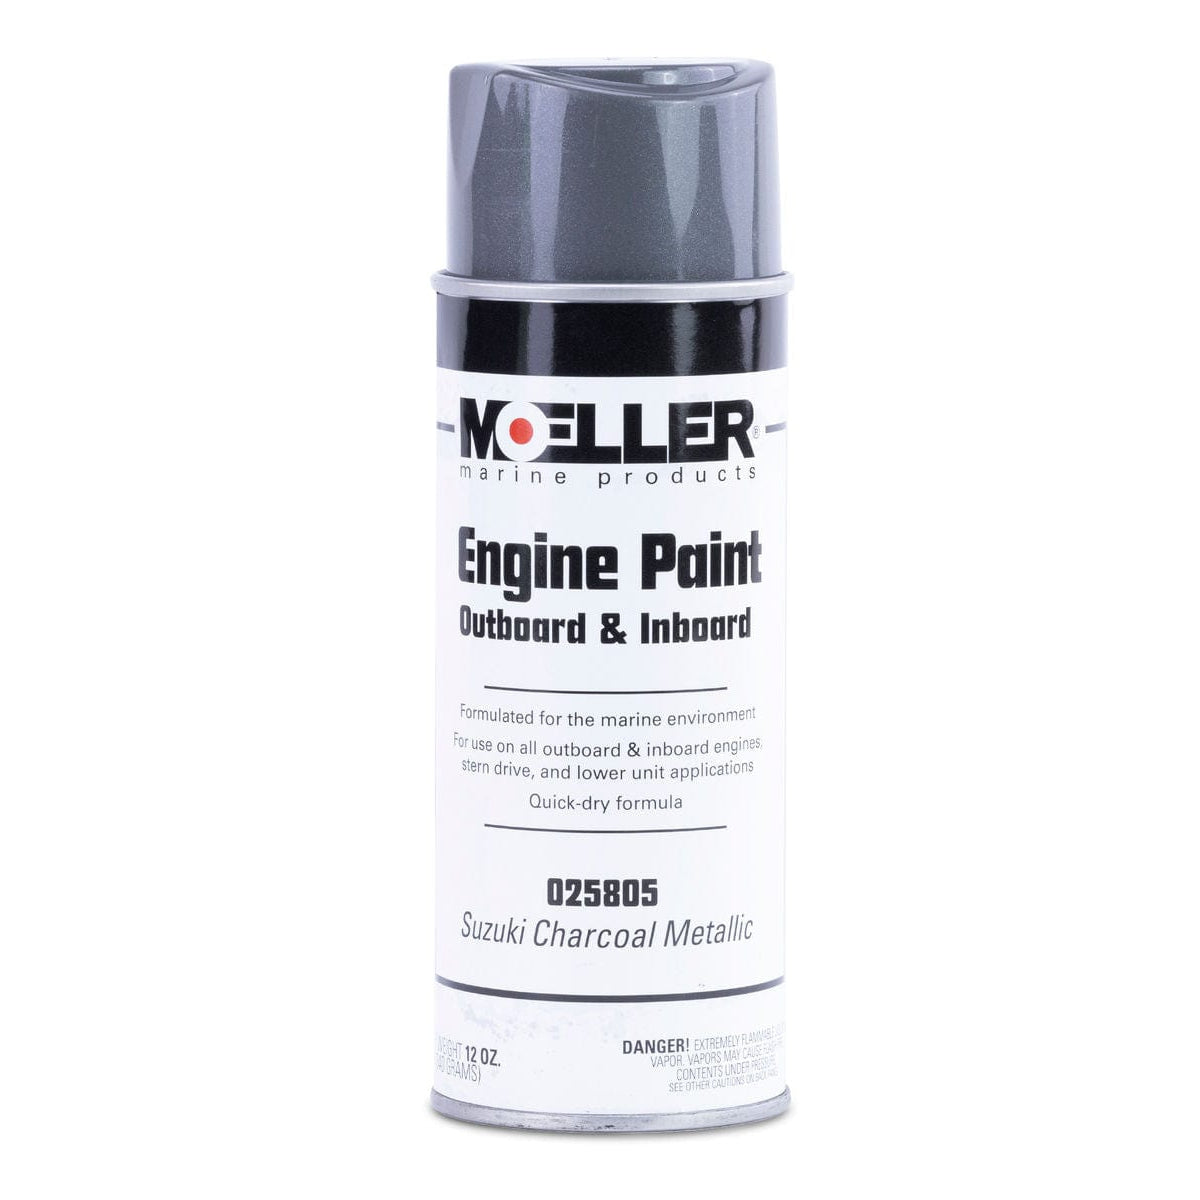 Moeller Qualifies for Free Ground Shipping Moeller Color Vision Paint Suzuki Charcoal Metallic Engine #025805